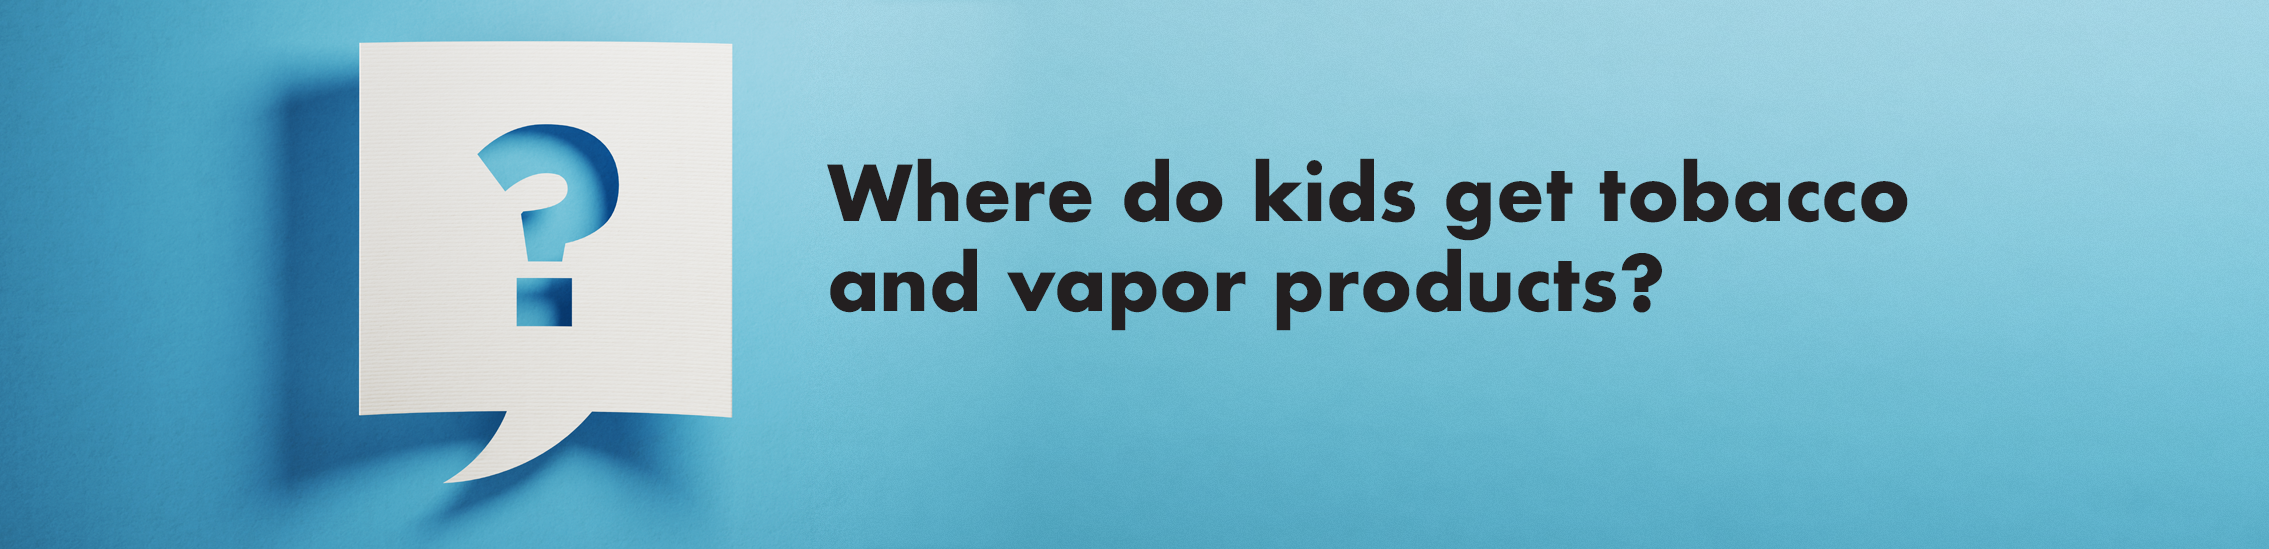 Where do kids get tobacco and vapor products?